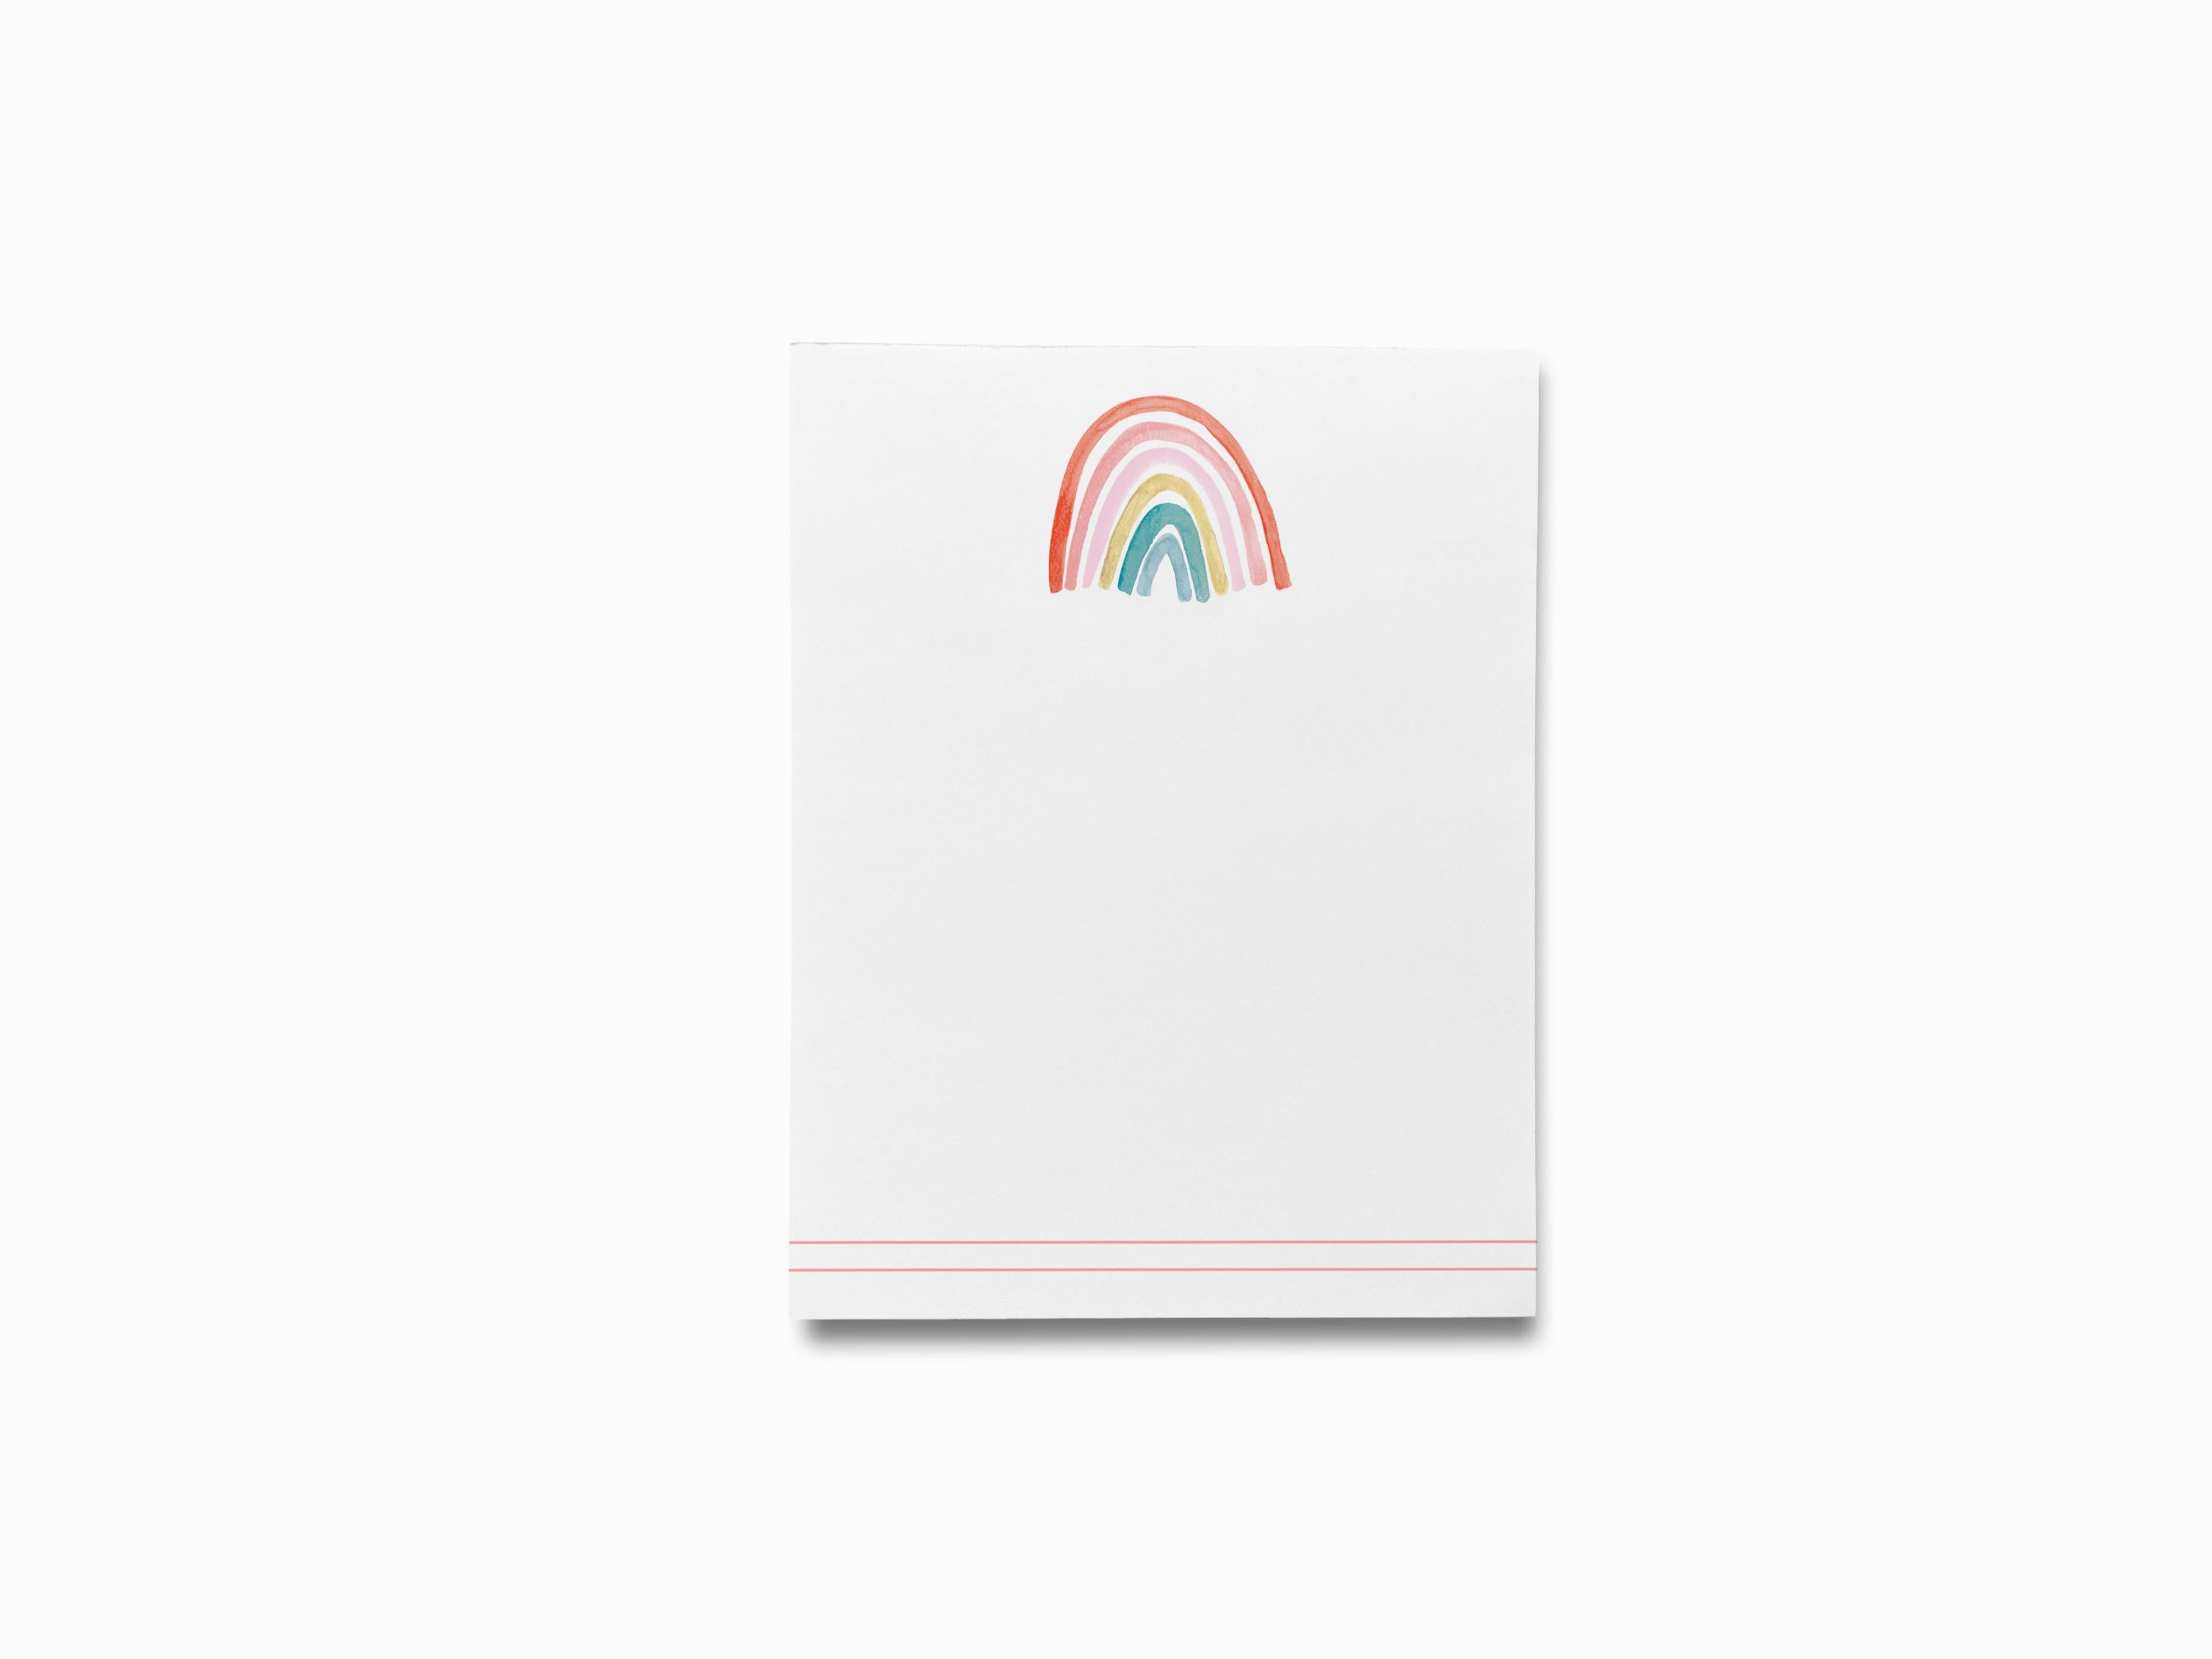 Boho Rainbow Notepad-These notepads feature our hand-painted watercolor rainbow, printed in the USA on a beautiful smooth stock. You choose which size you want (or bundled together for a beautiful gift set) and makes a great gift for the checklist and boho lover in your life.-The Singing Little Bird